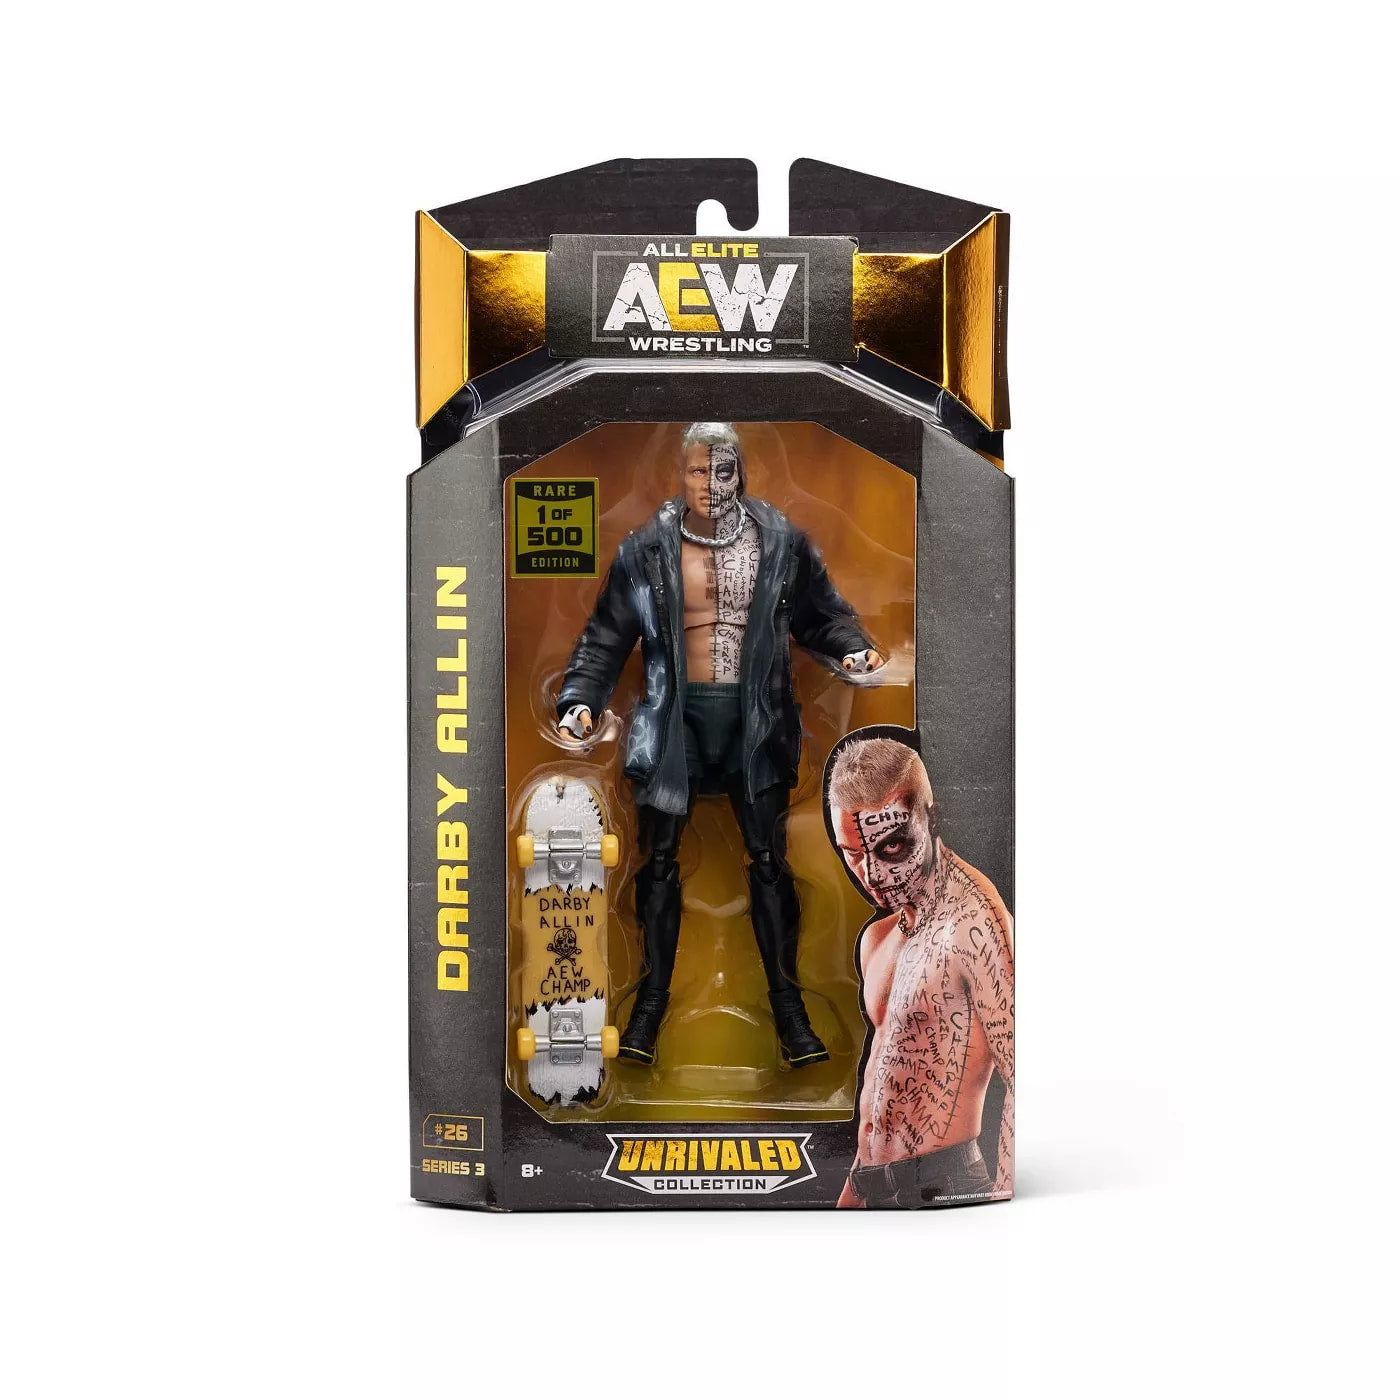 AEW Jazwares Unrivaled Collection 3 #26 Darby Allin [Rare Edition]